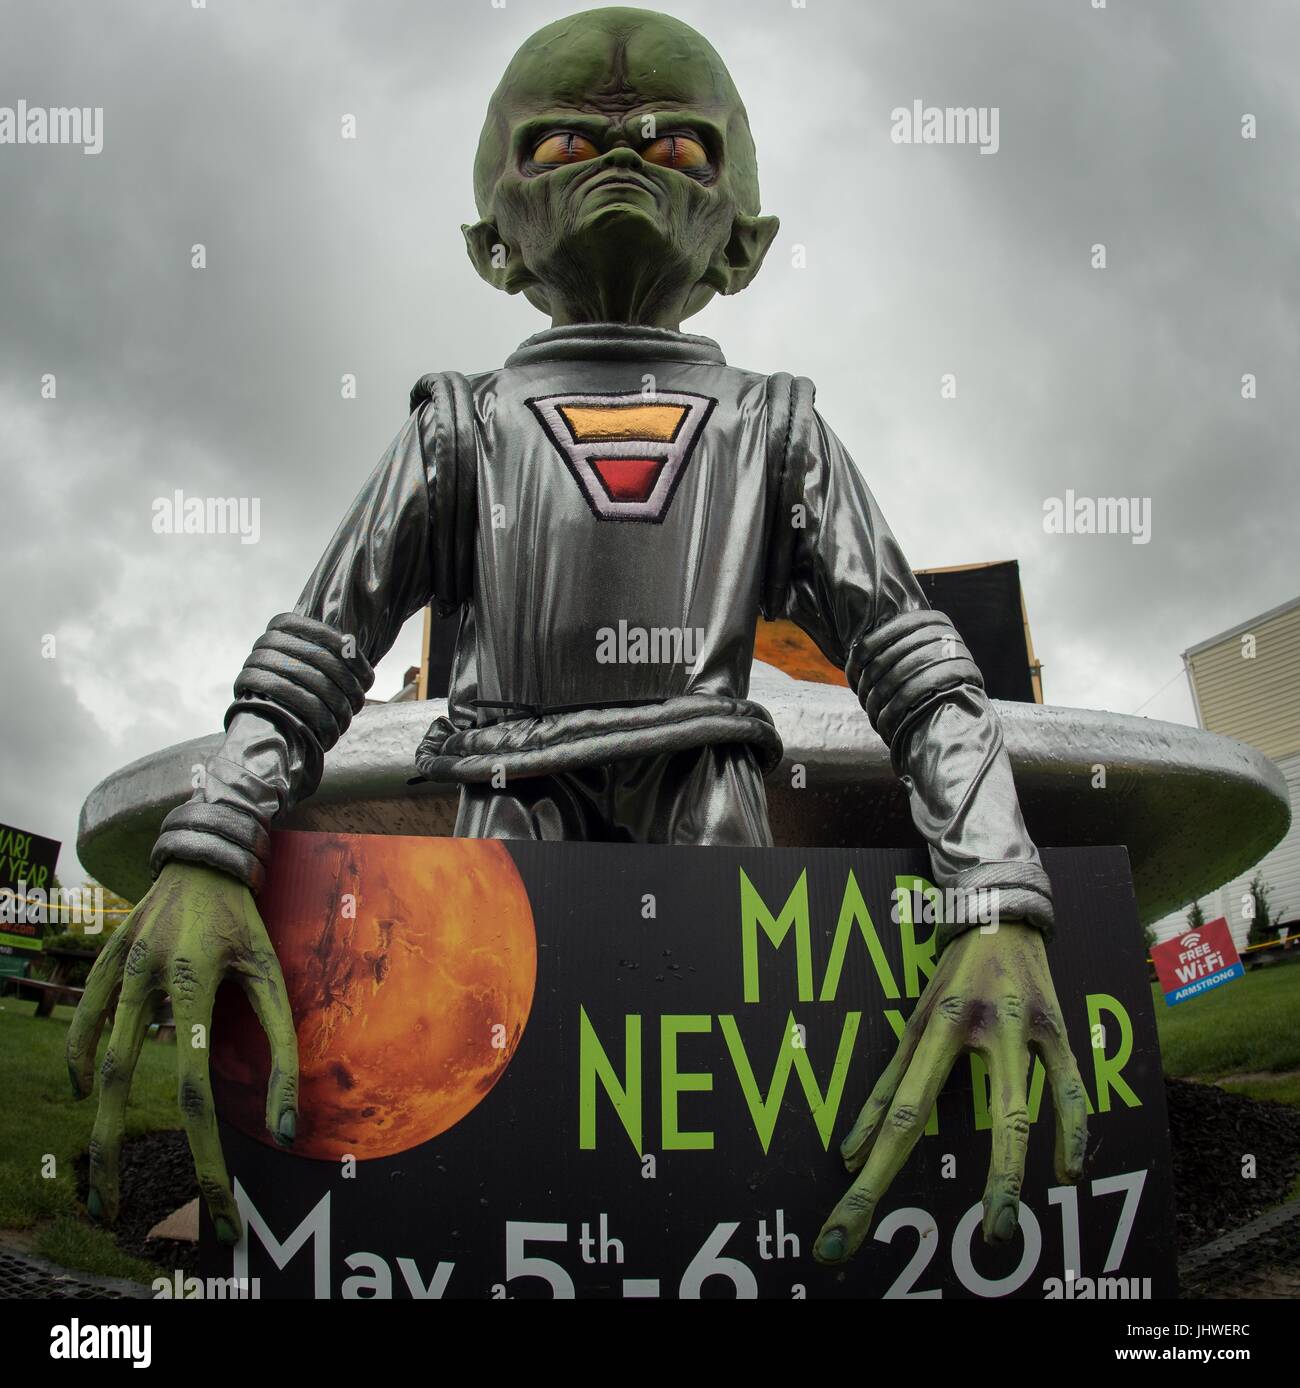 A model alien and spacecraft welcomes visitors to the NASA Mars New Year celebration May 6, 2017 in Mars, Pennsylvania.     (photo by Bill Ingals via Planetpix) Stock Photo